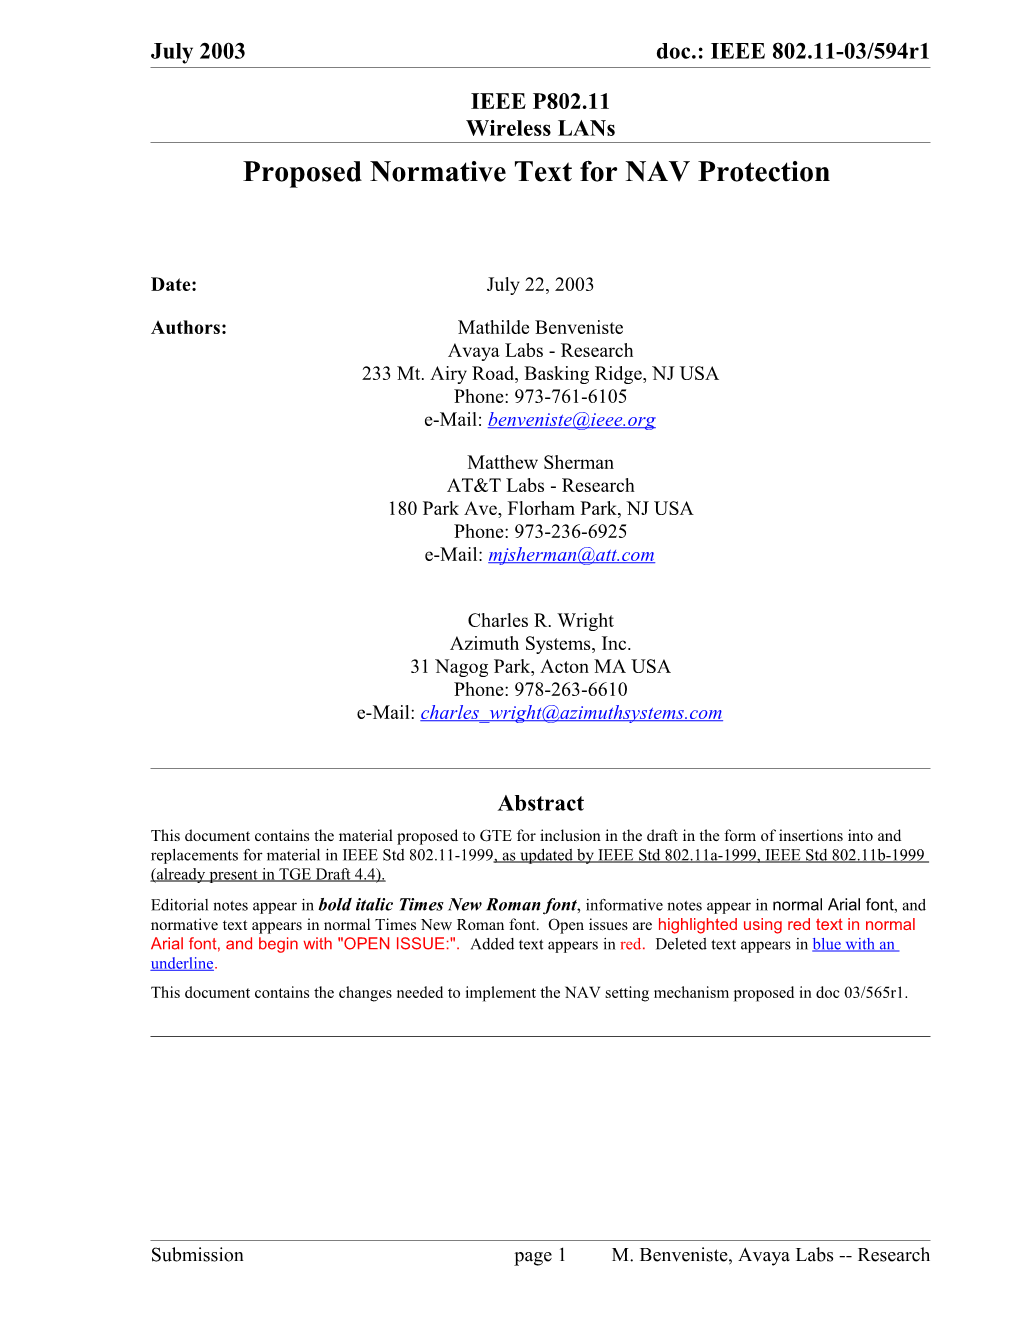 Proposed Normative Text for NAV Protection